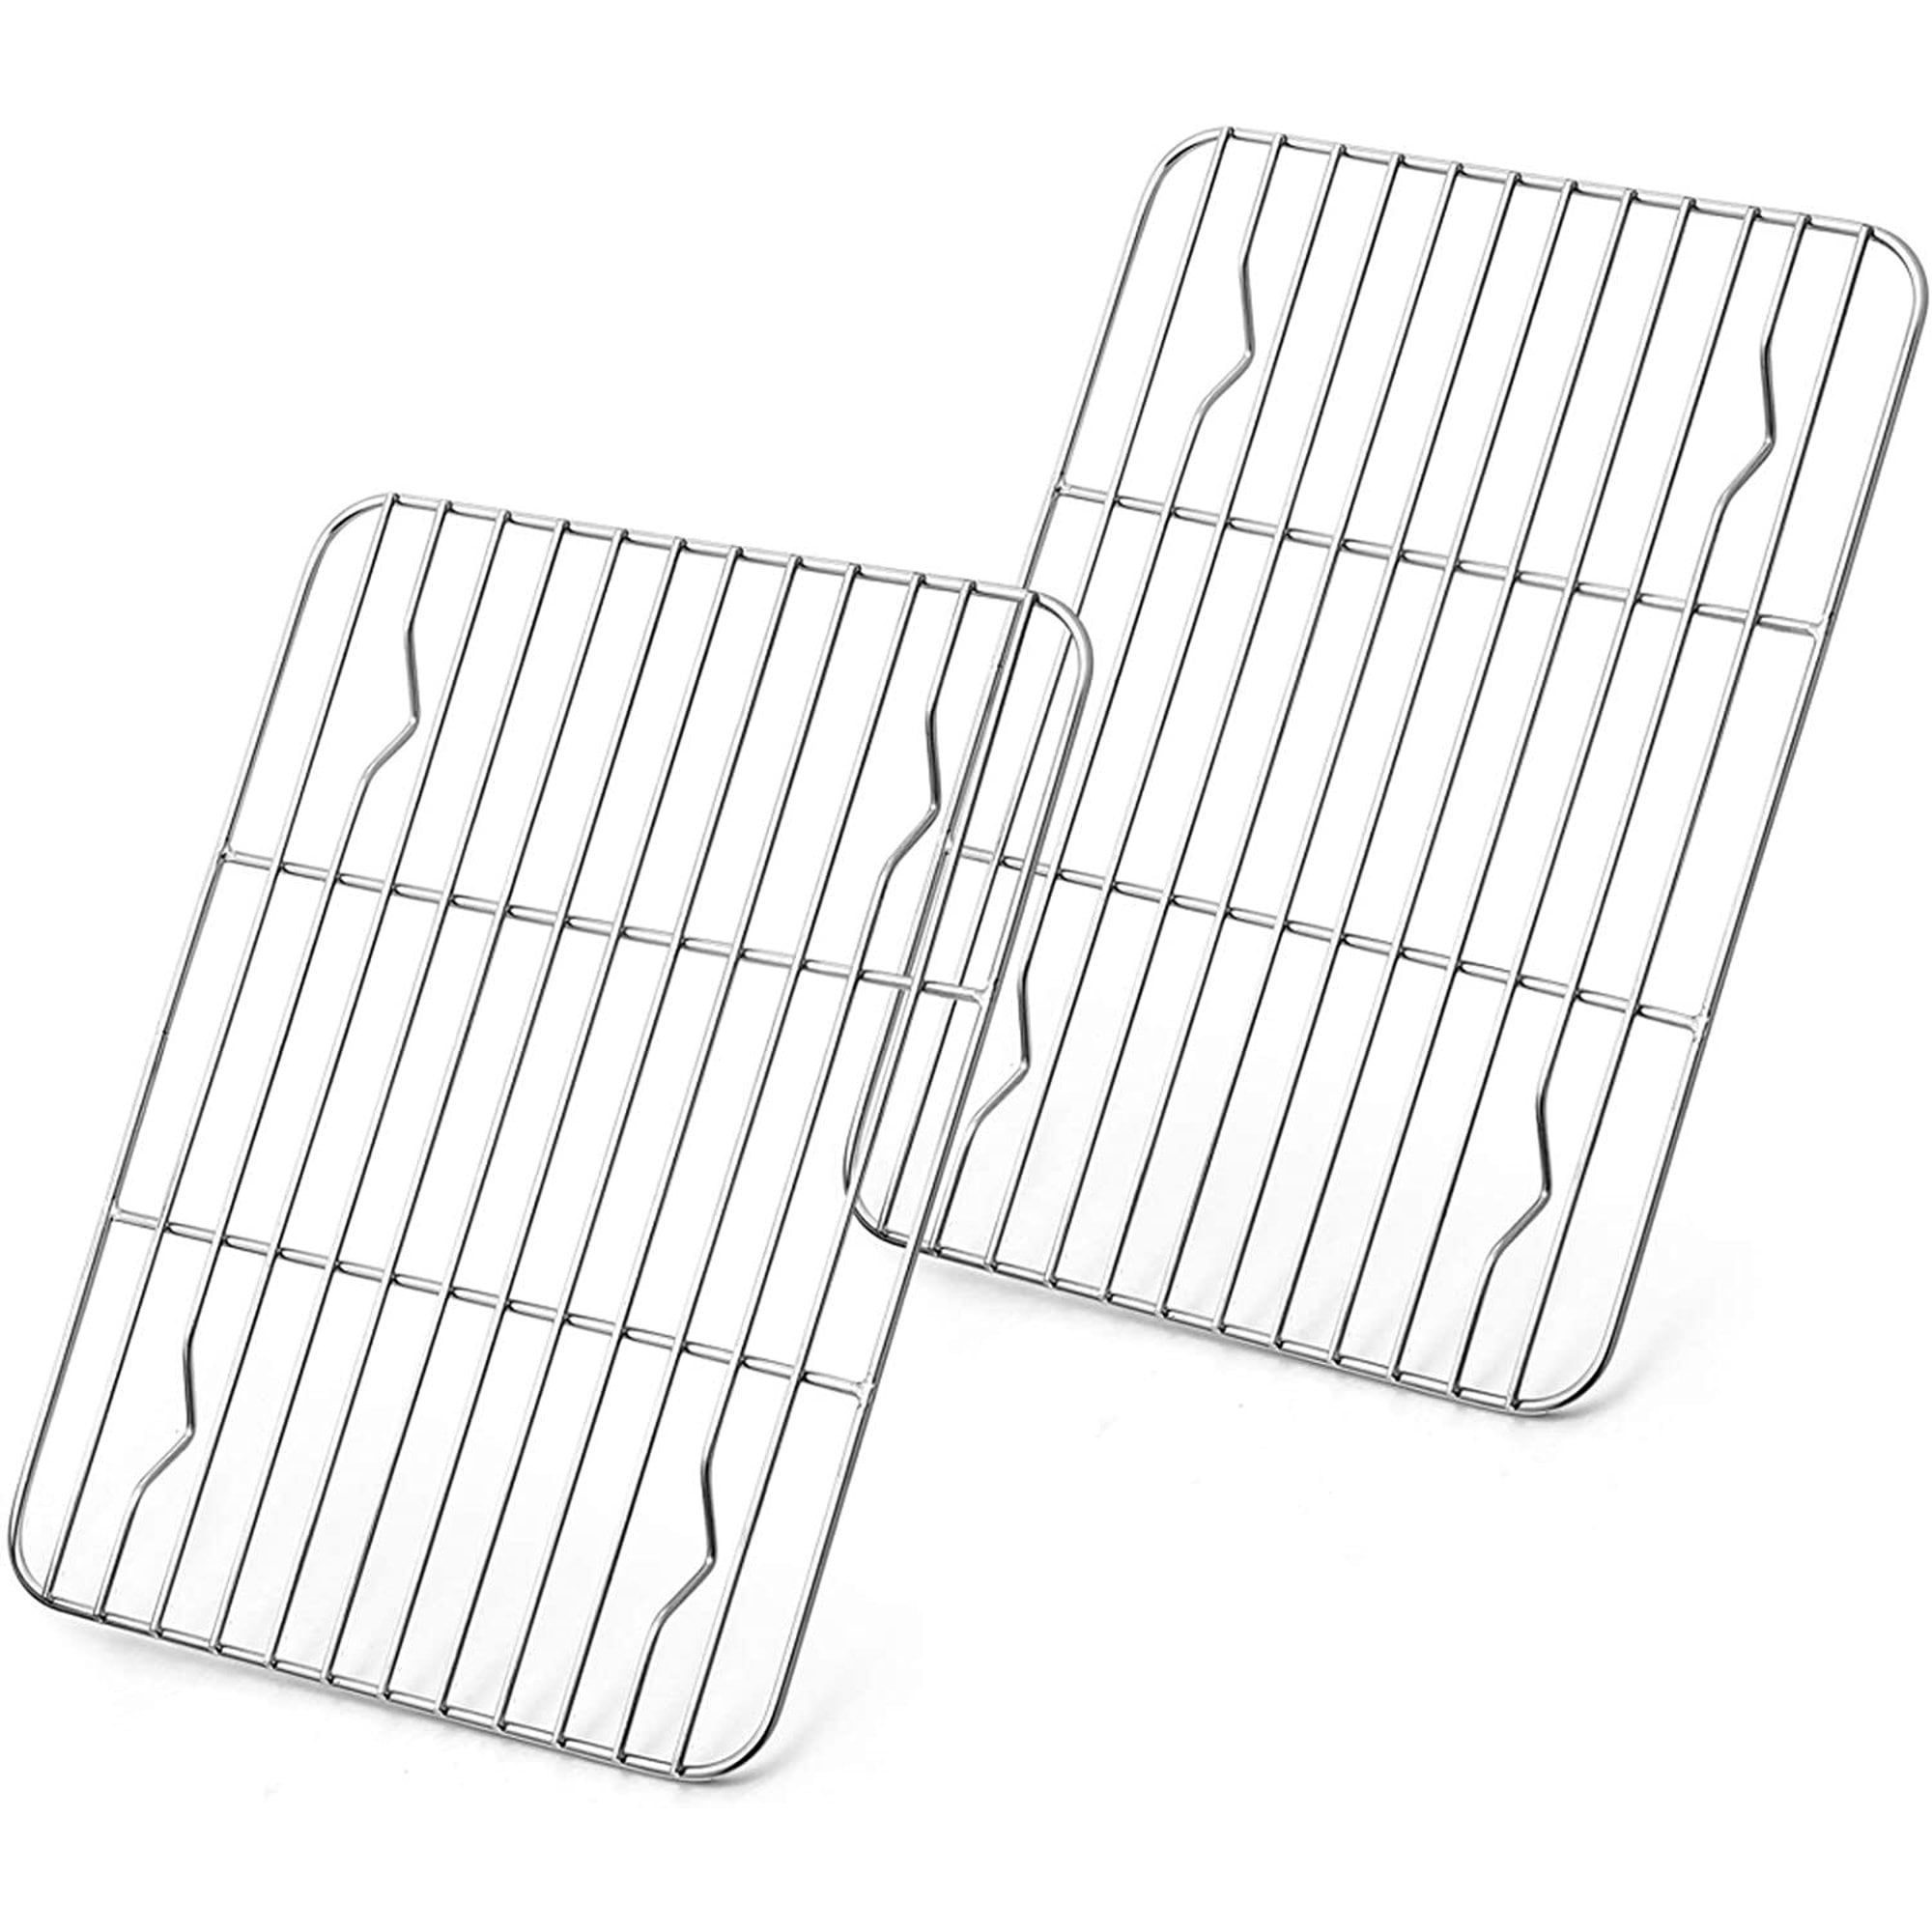 8.67X6.3 Wire Cooling Rack - Stainless Steel Wire Grill For Oven Cooking  Fits Jelly Roll Pans - Wire Oven Rack & Cooking Rack For Baking, Baking,  Grilling & More 1PC 